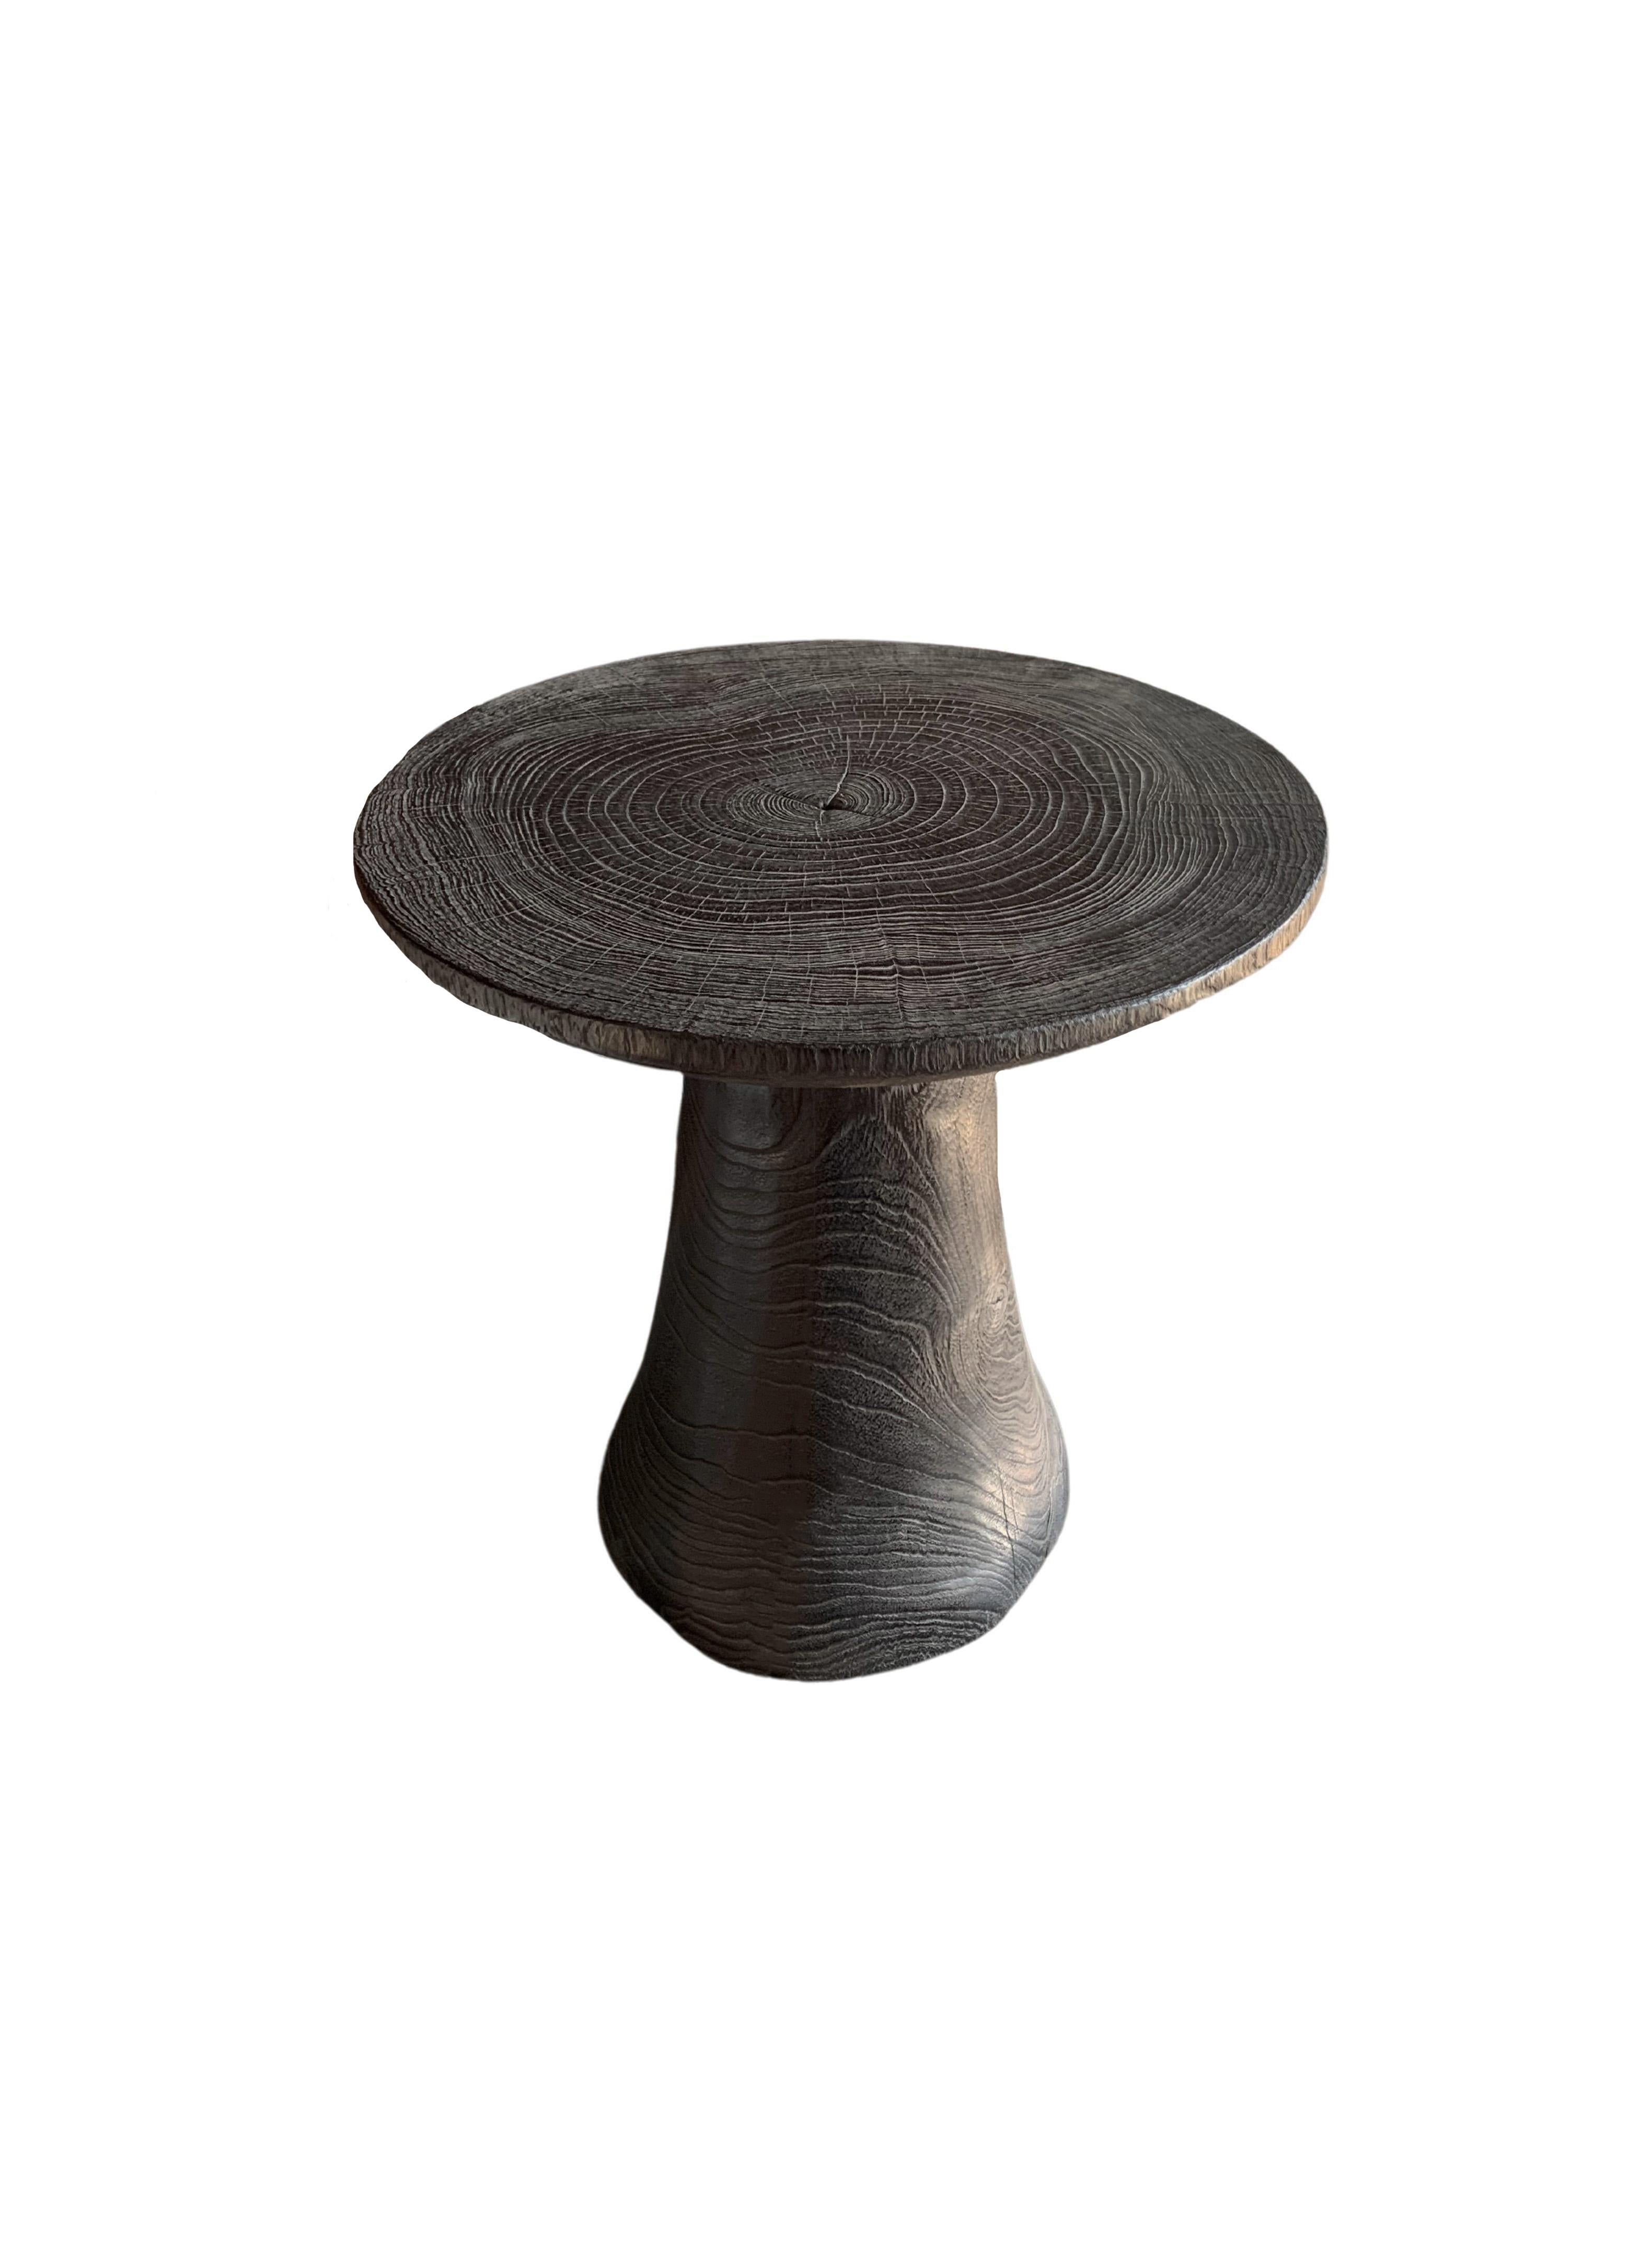 A wonderfully organic round side table. Its rich black pigment was achieved through burning the wood three times. Its neutral pigment and subtle wood texture makes it perfect for any space. A uniquely sculptural and versatile piece certain to invoke